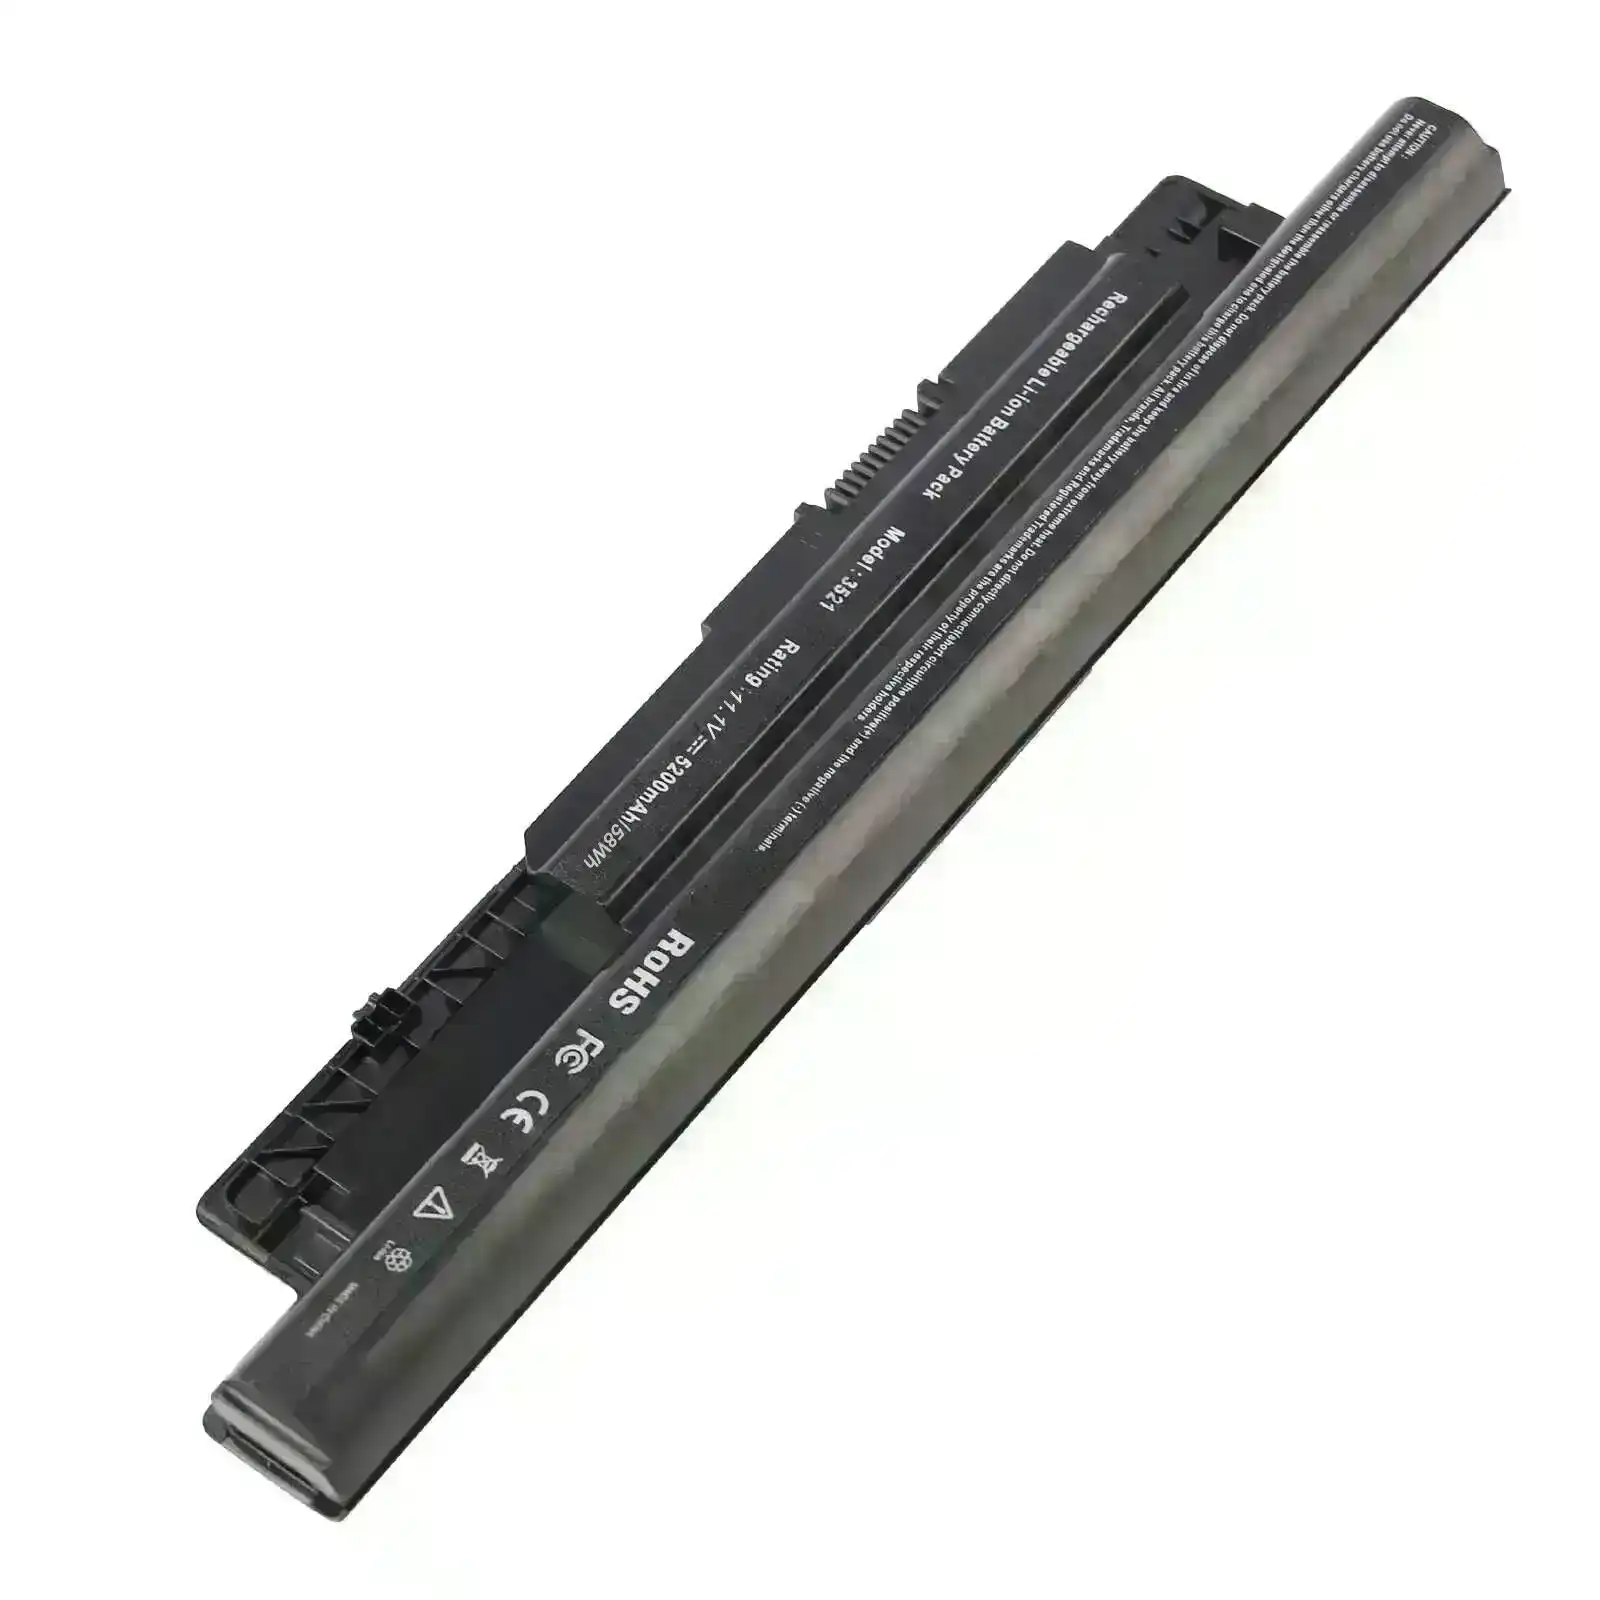 MR90Y Laptop Battery for Inspiron 15 3521 3531 3537 3542 3543 15R 5521 5537